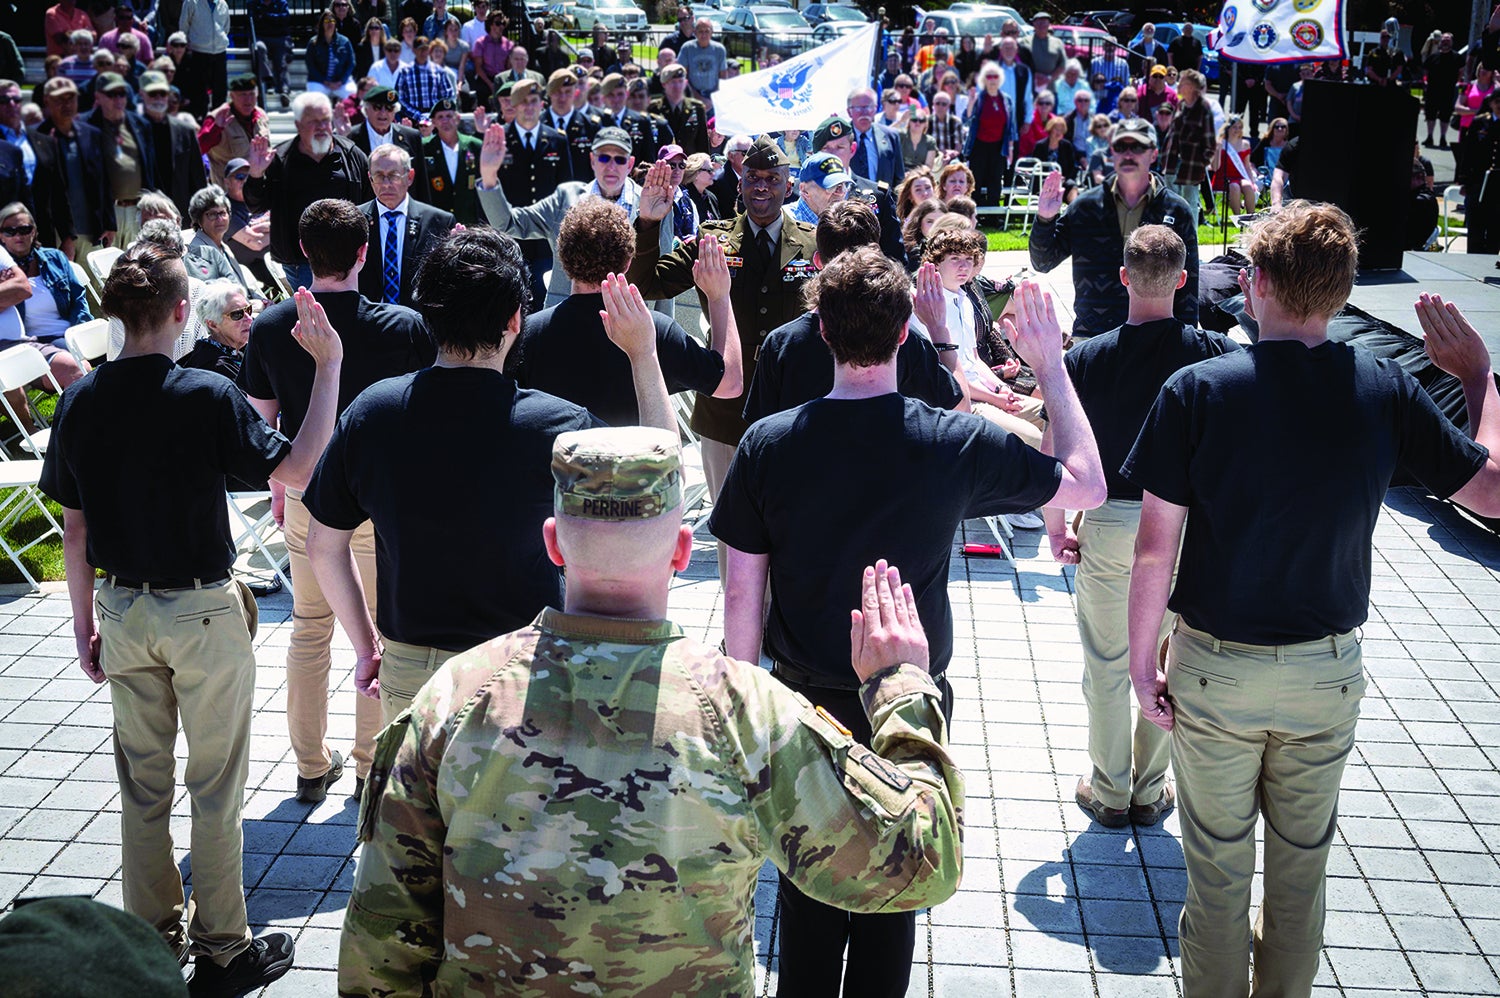 I Corps commander Lt. Gen. Xavier Brunson, center facing camera, administers the oath of enlistment during a ceremony in Hoquiam, Washington. (Credit: U.S. Army/Sgt. Thoman Johnson)